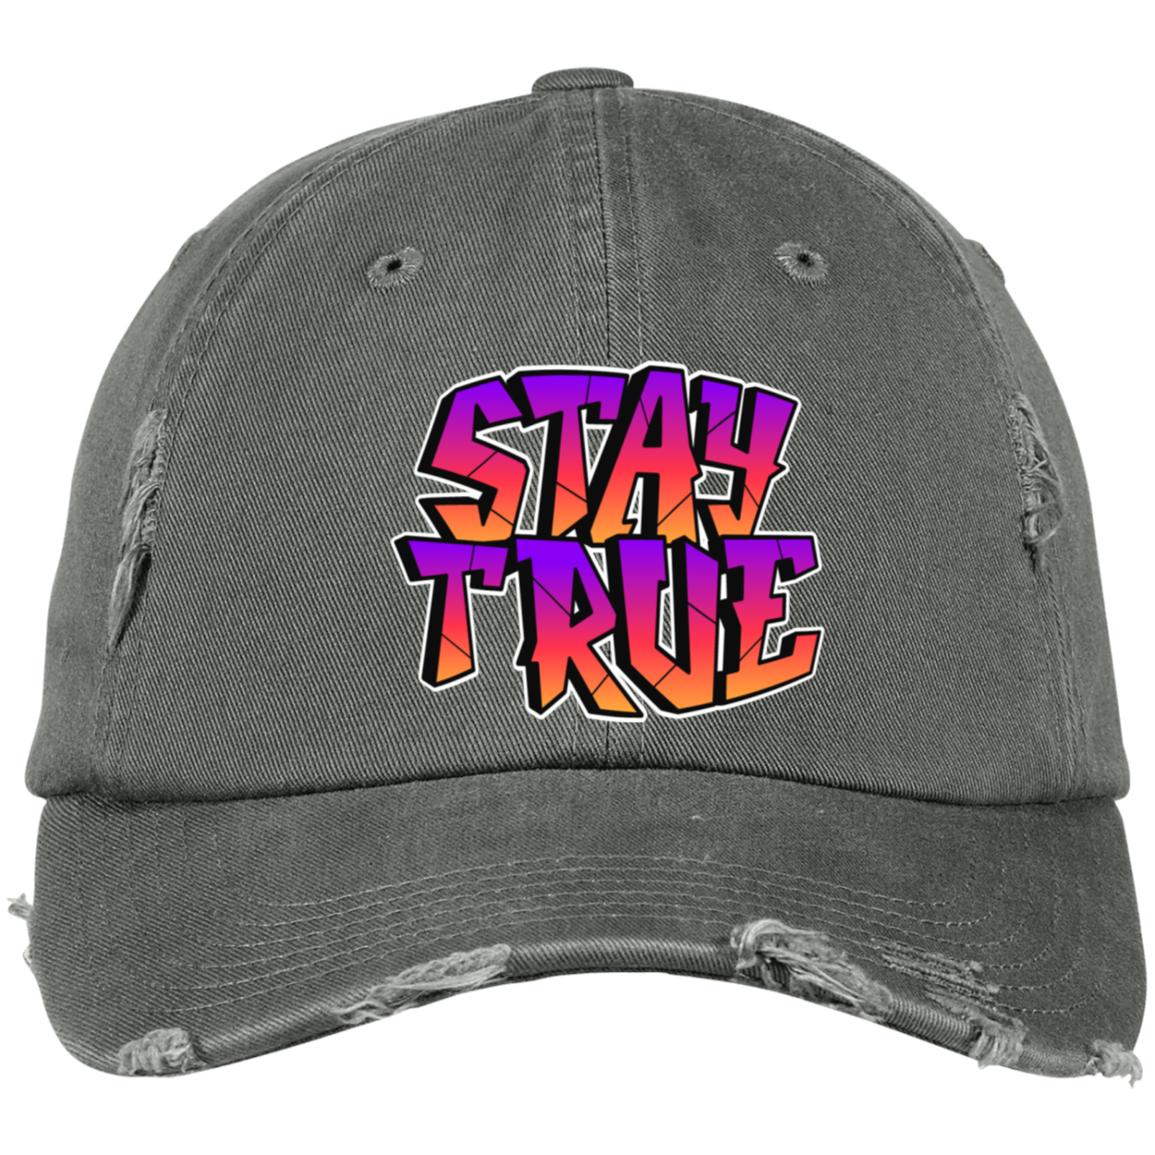 Stay True Embroidered Distressed Dad Cap